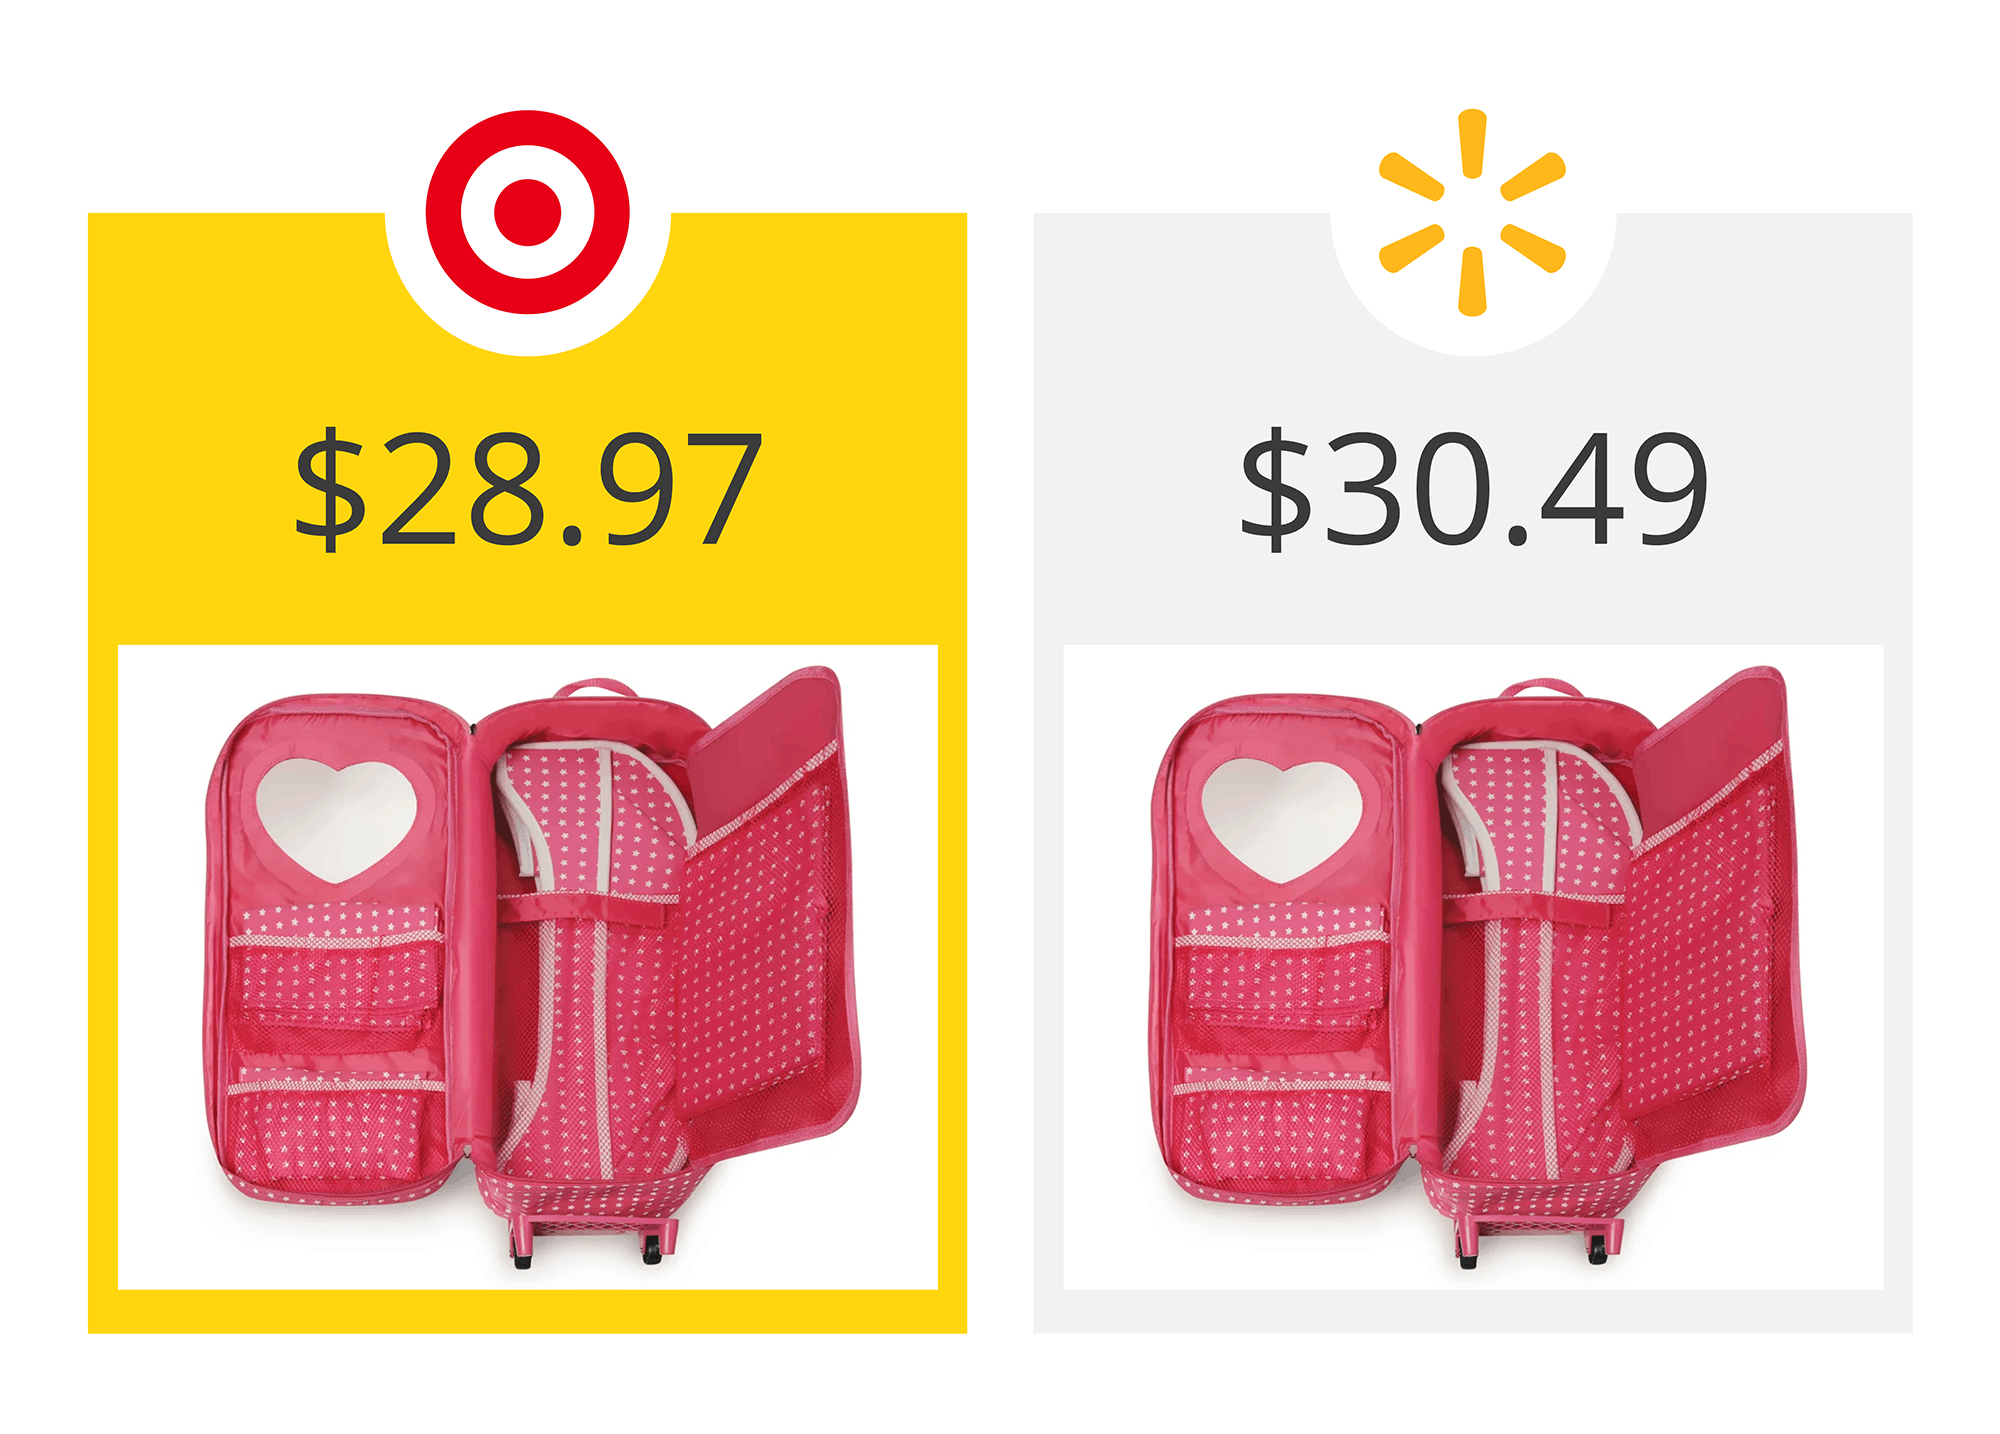 target as the winner on a graphic showing price comparison between target's our generation and walmart's my life as doll carrying cases